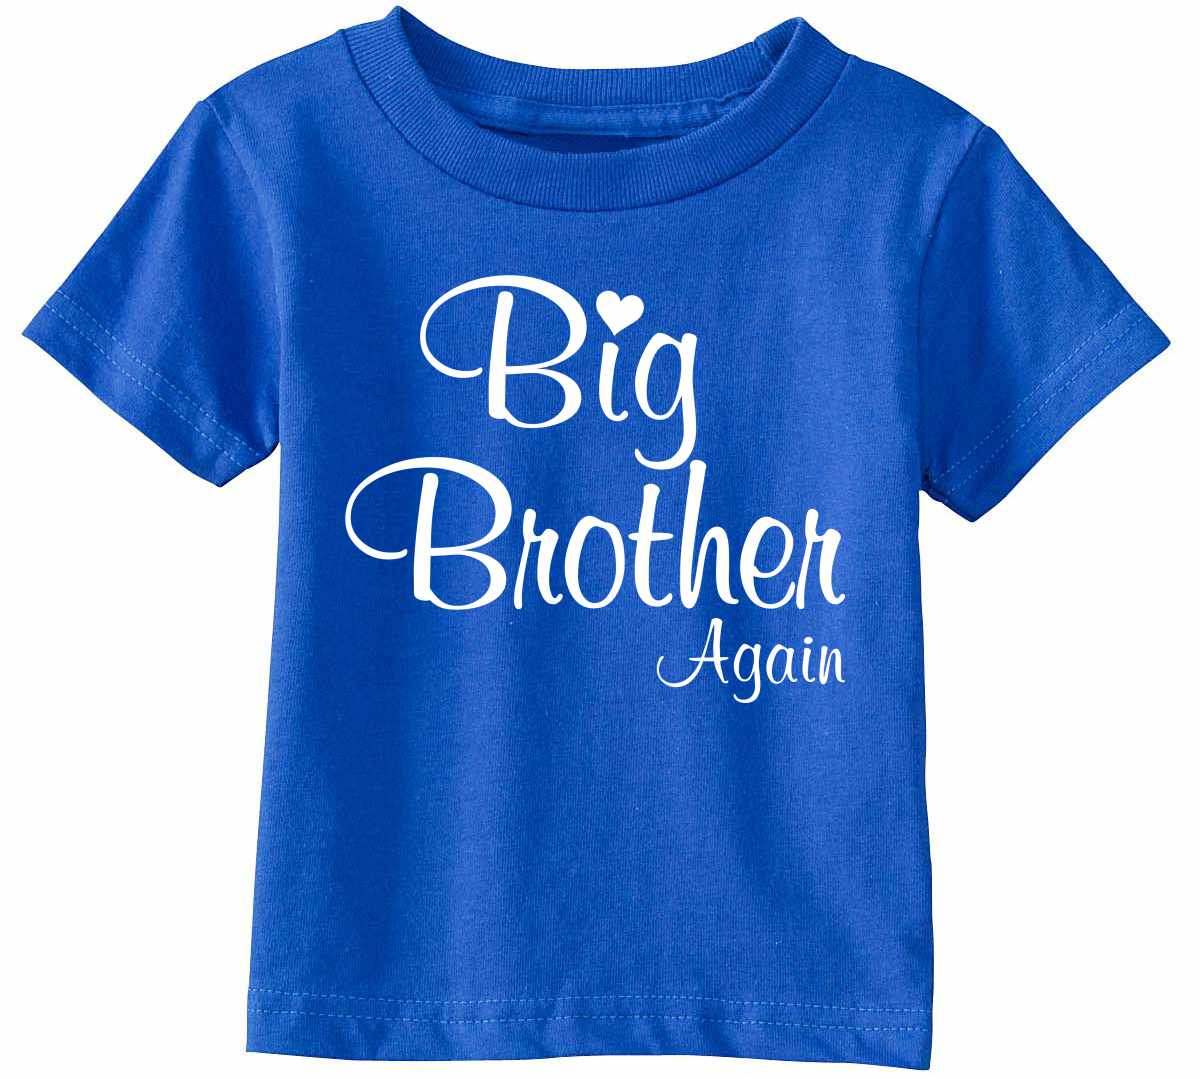 Big Brother Again on Infant-Toddler T-Shirt